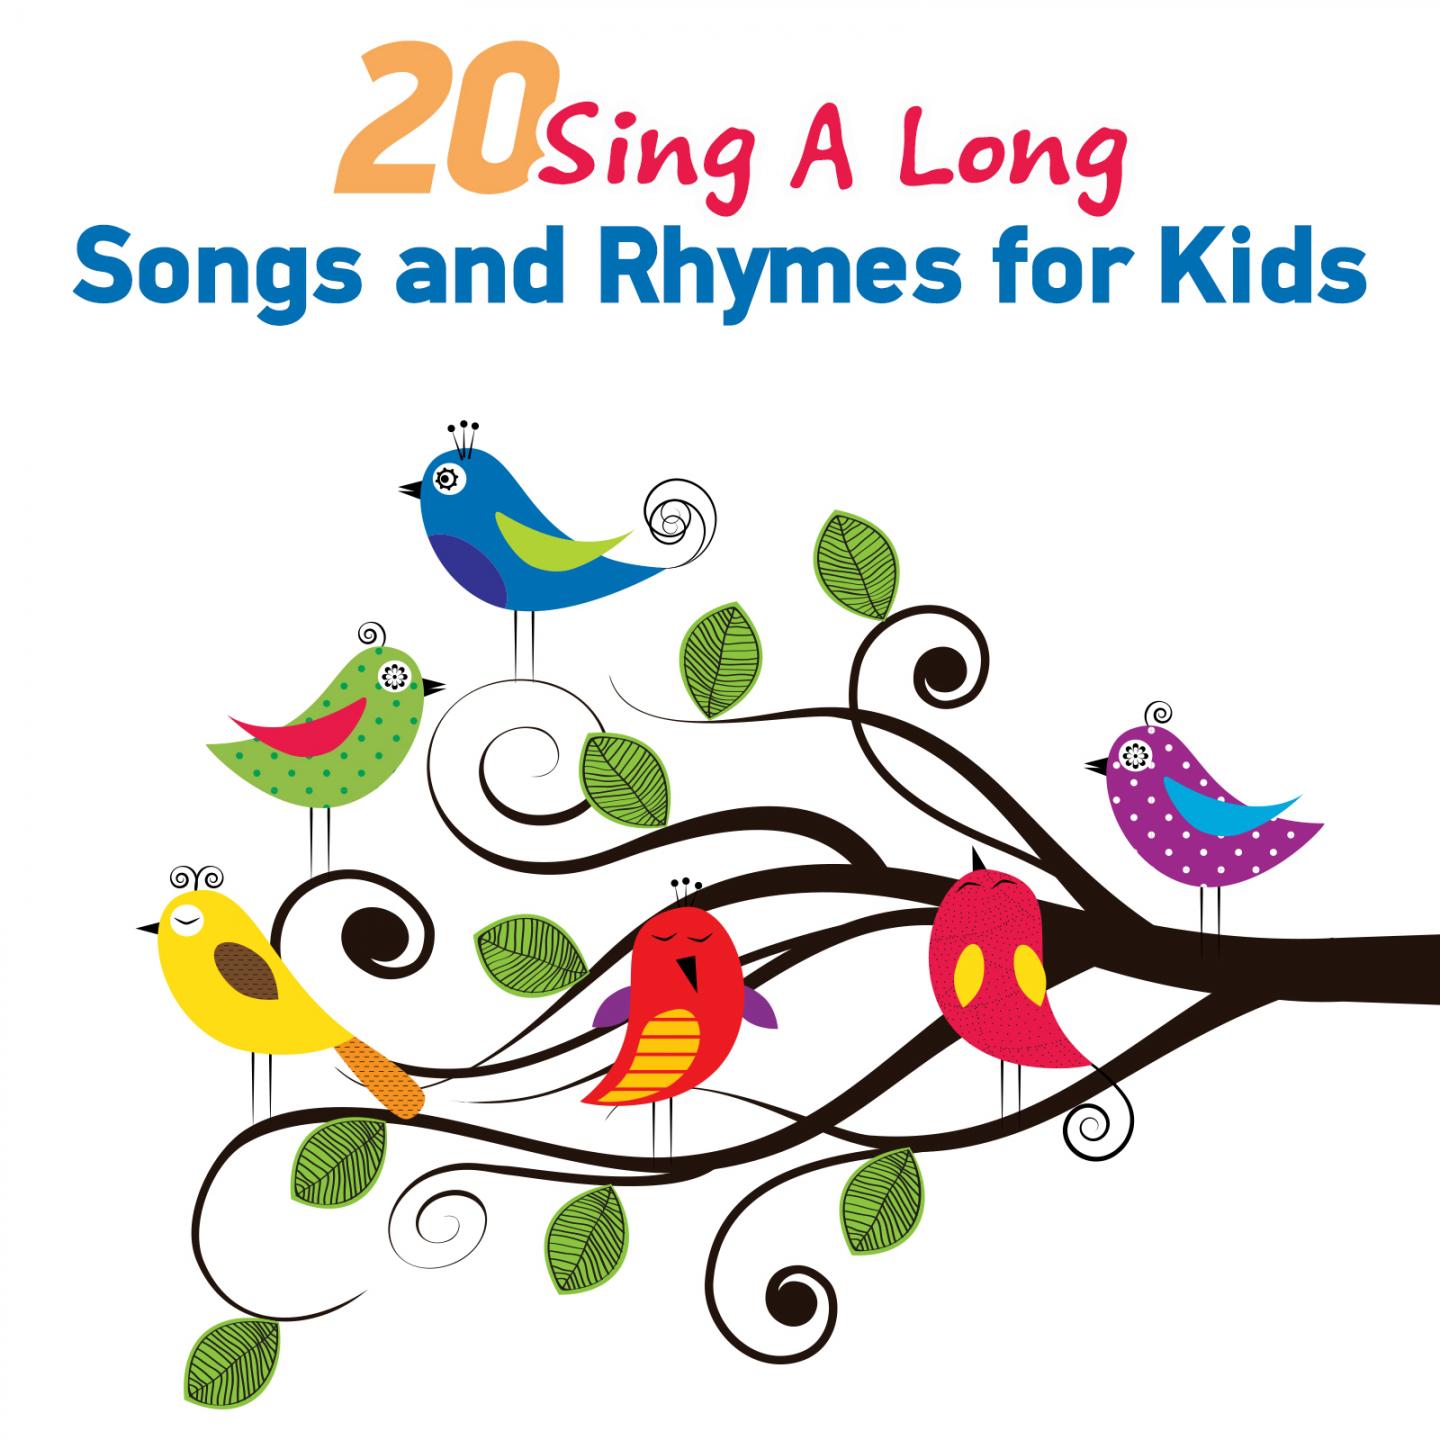 20 Sing a Long Songs and Rhymes for Kids